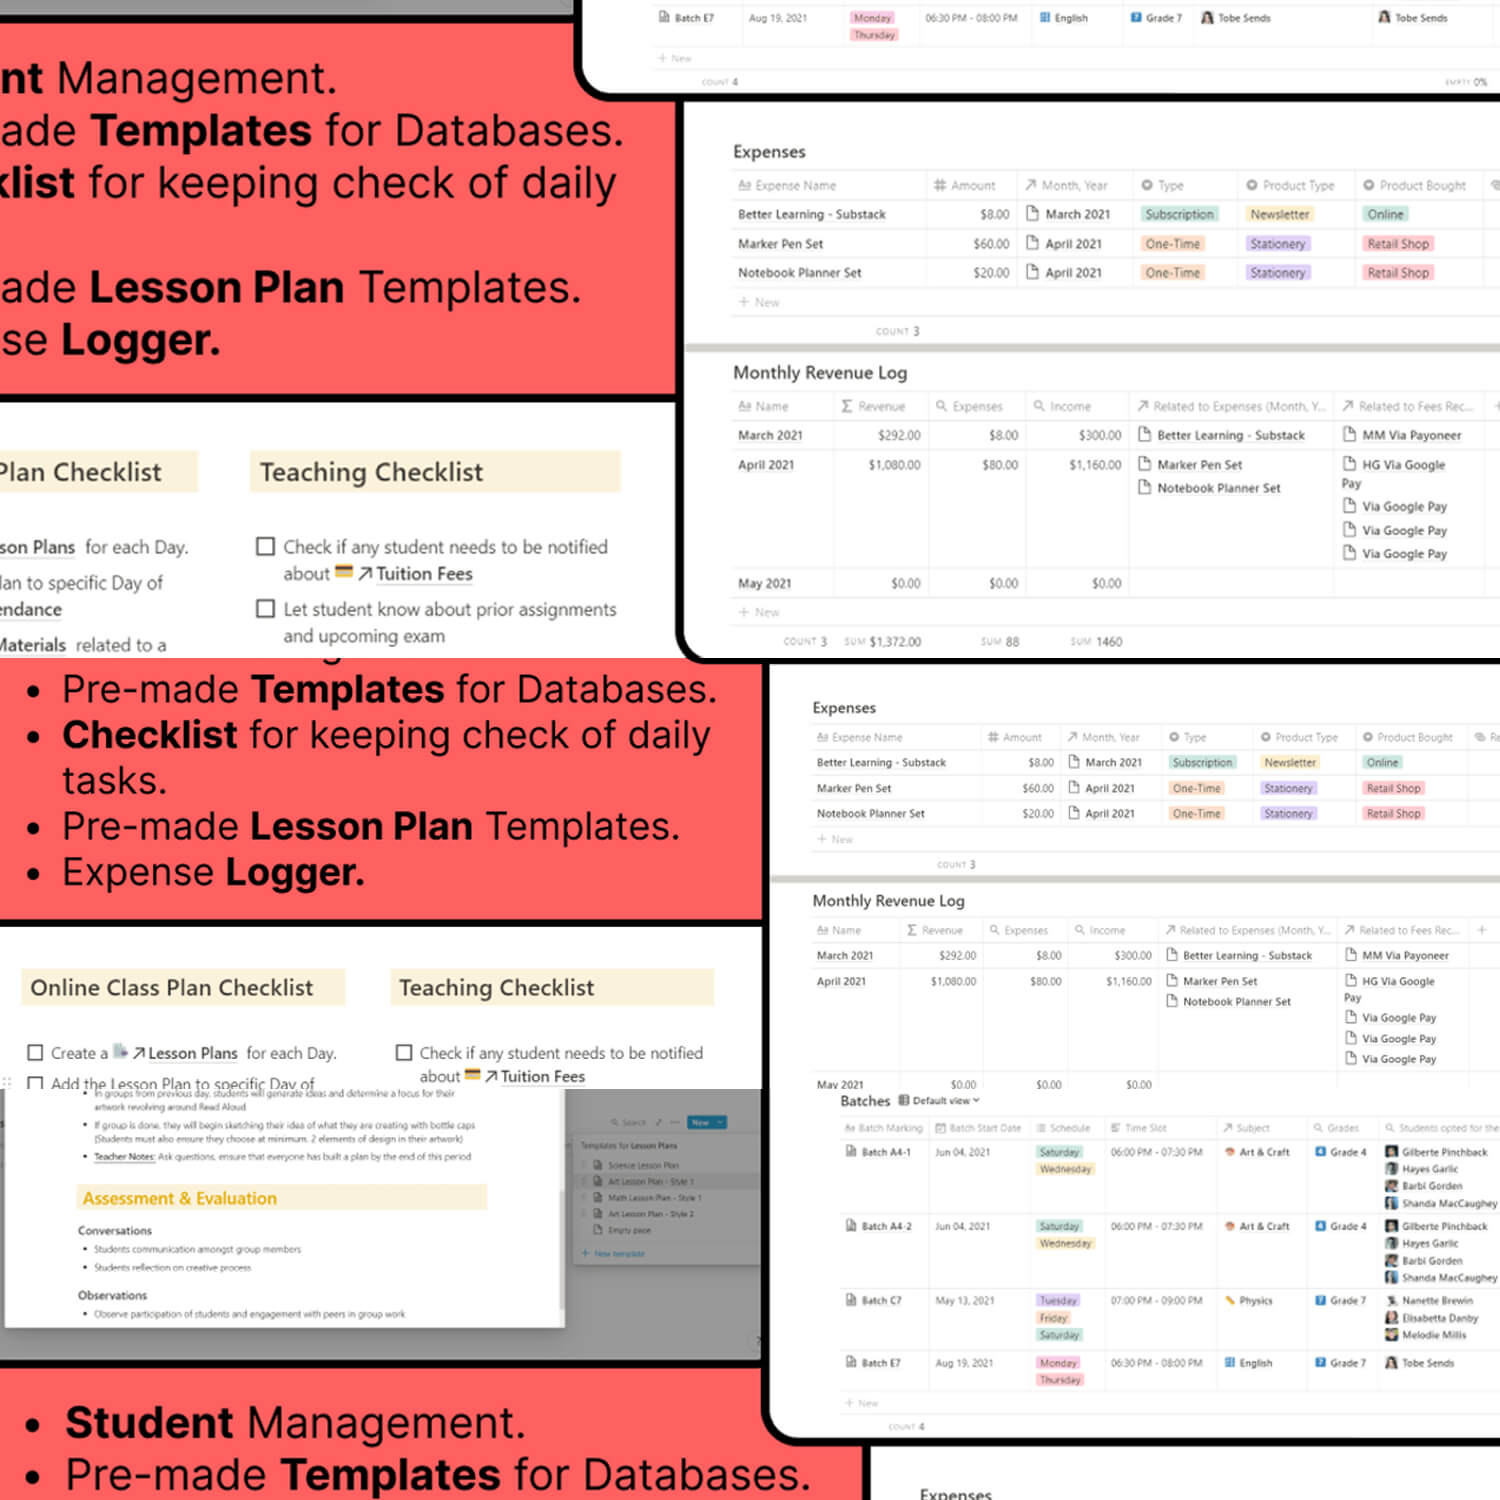 Made Lesson Plan Templates.